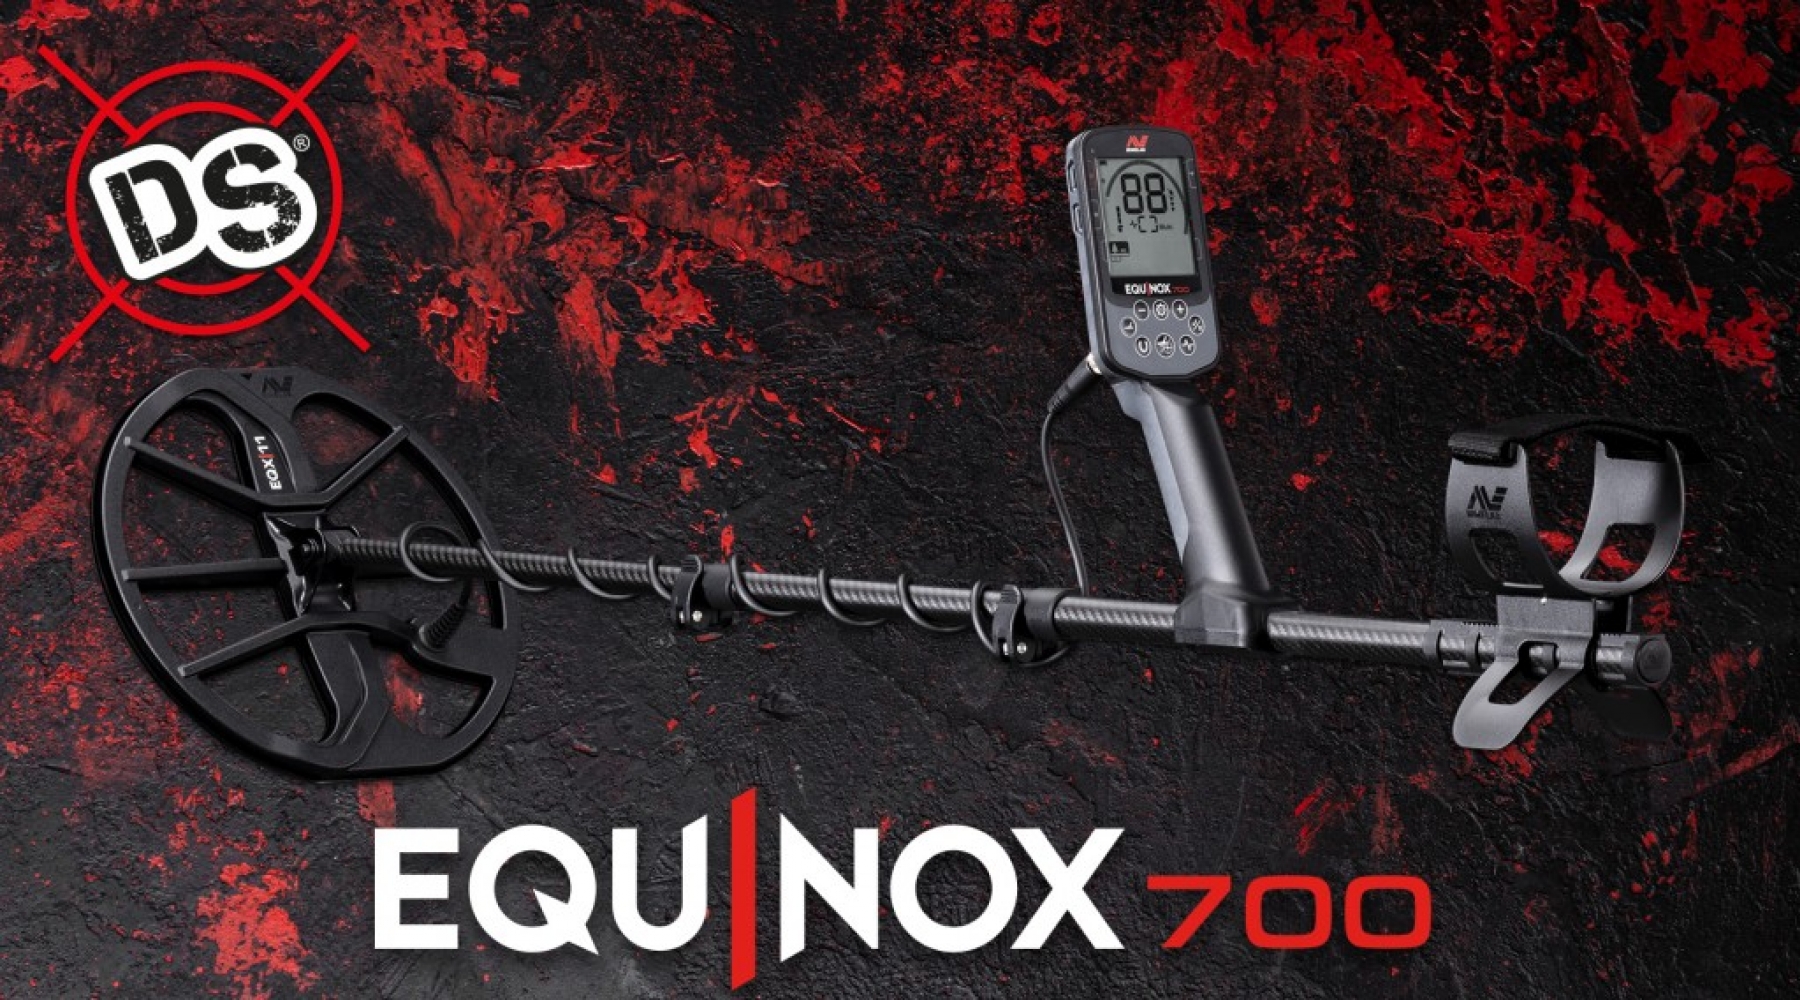 Equinox 700: discover the new Minelab